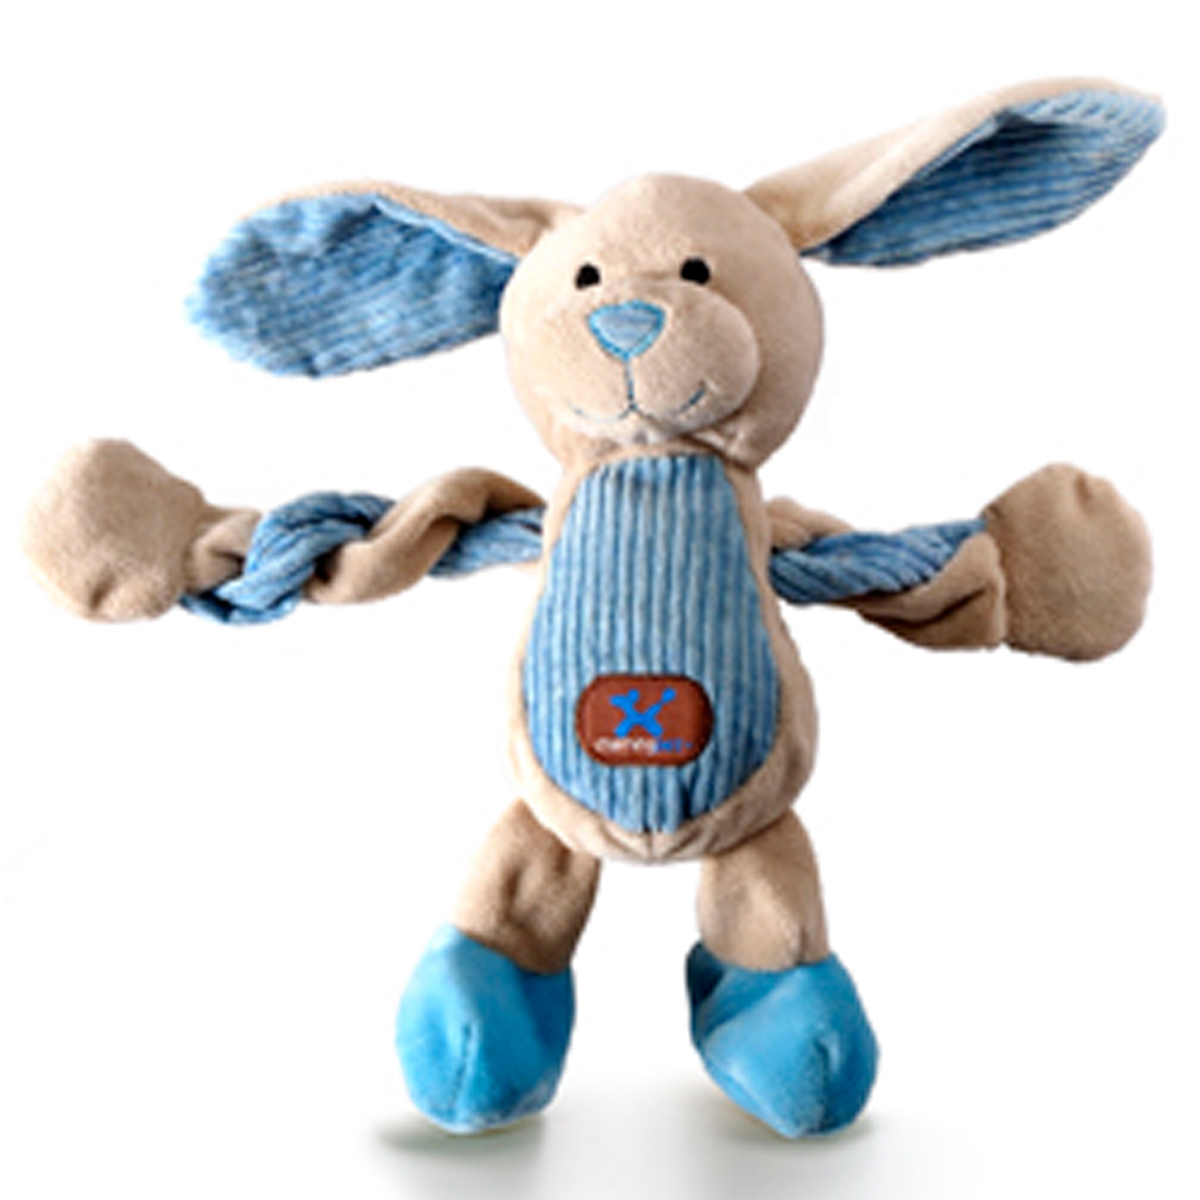 Charming Pet Farm Pulleez Dog Toy - Buster Blue Bunny